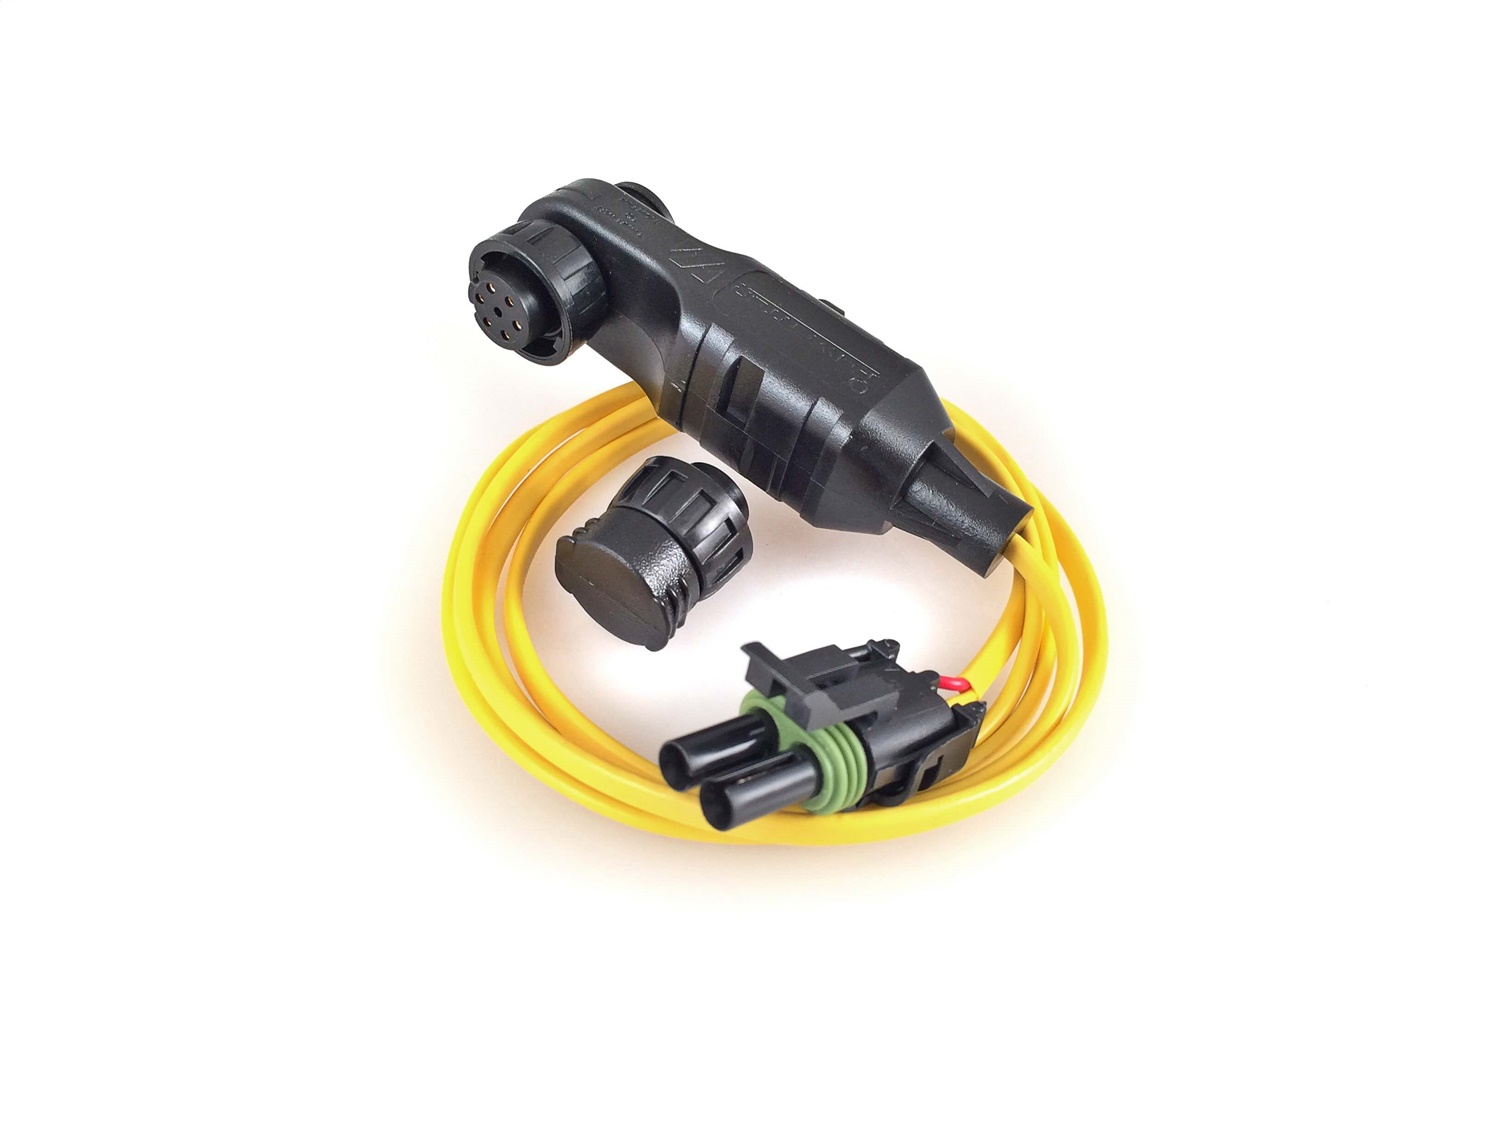 DiabloSport 98920 Accessory System Starter Kit Cable